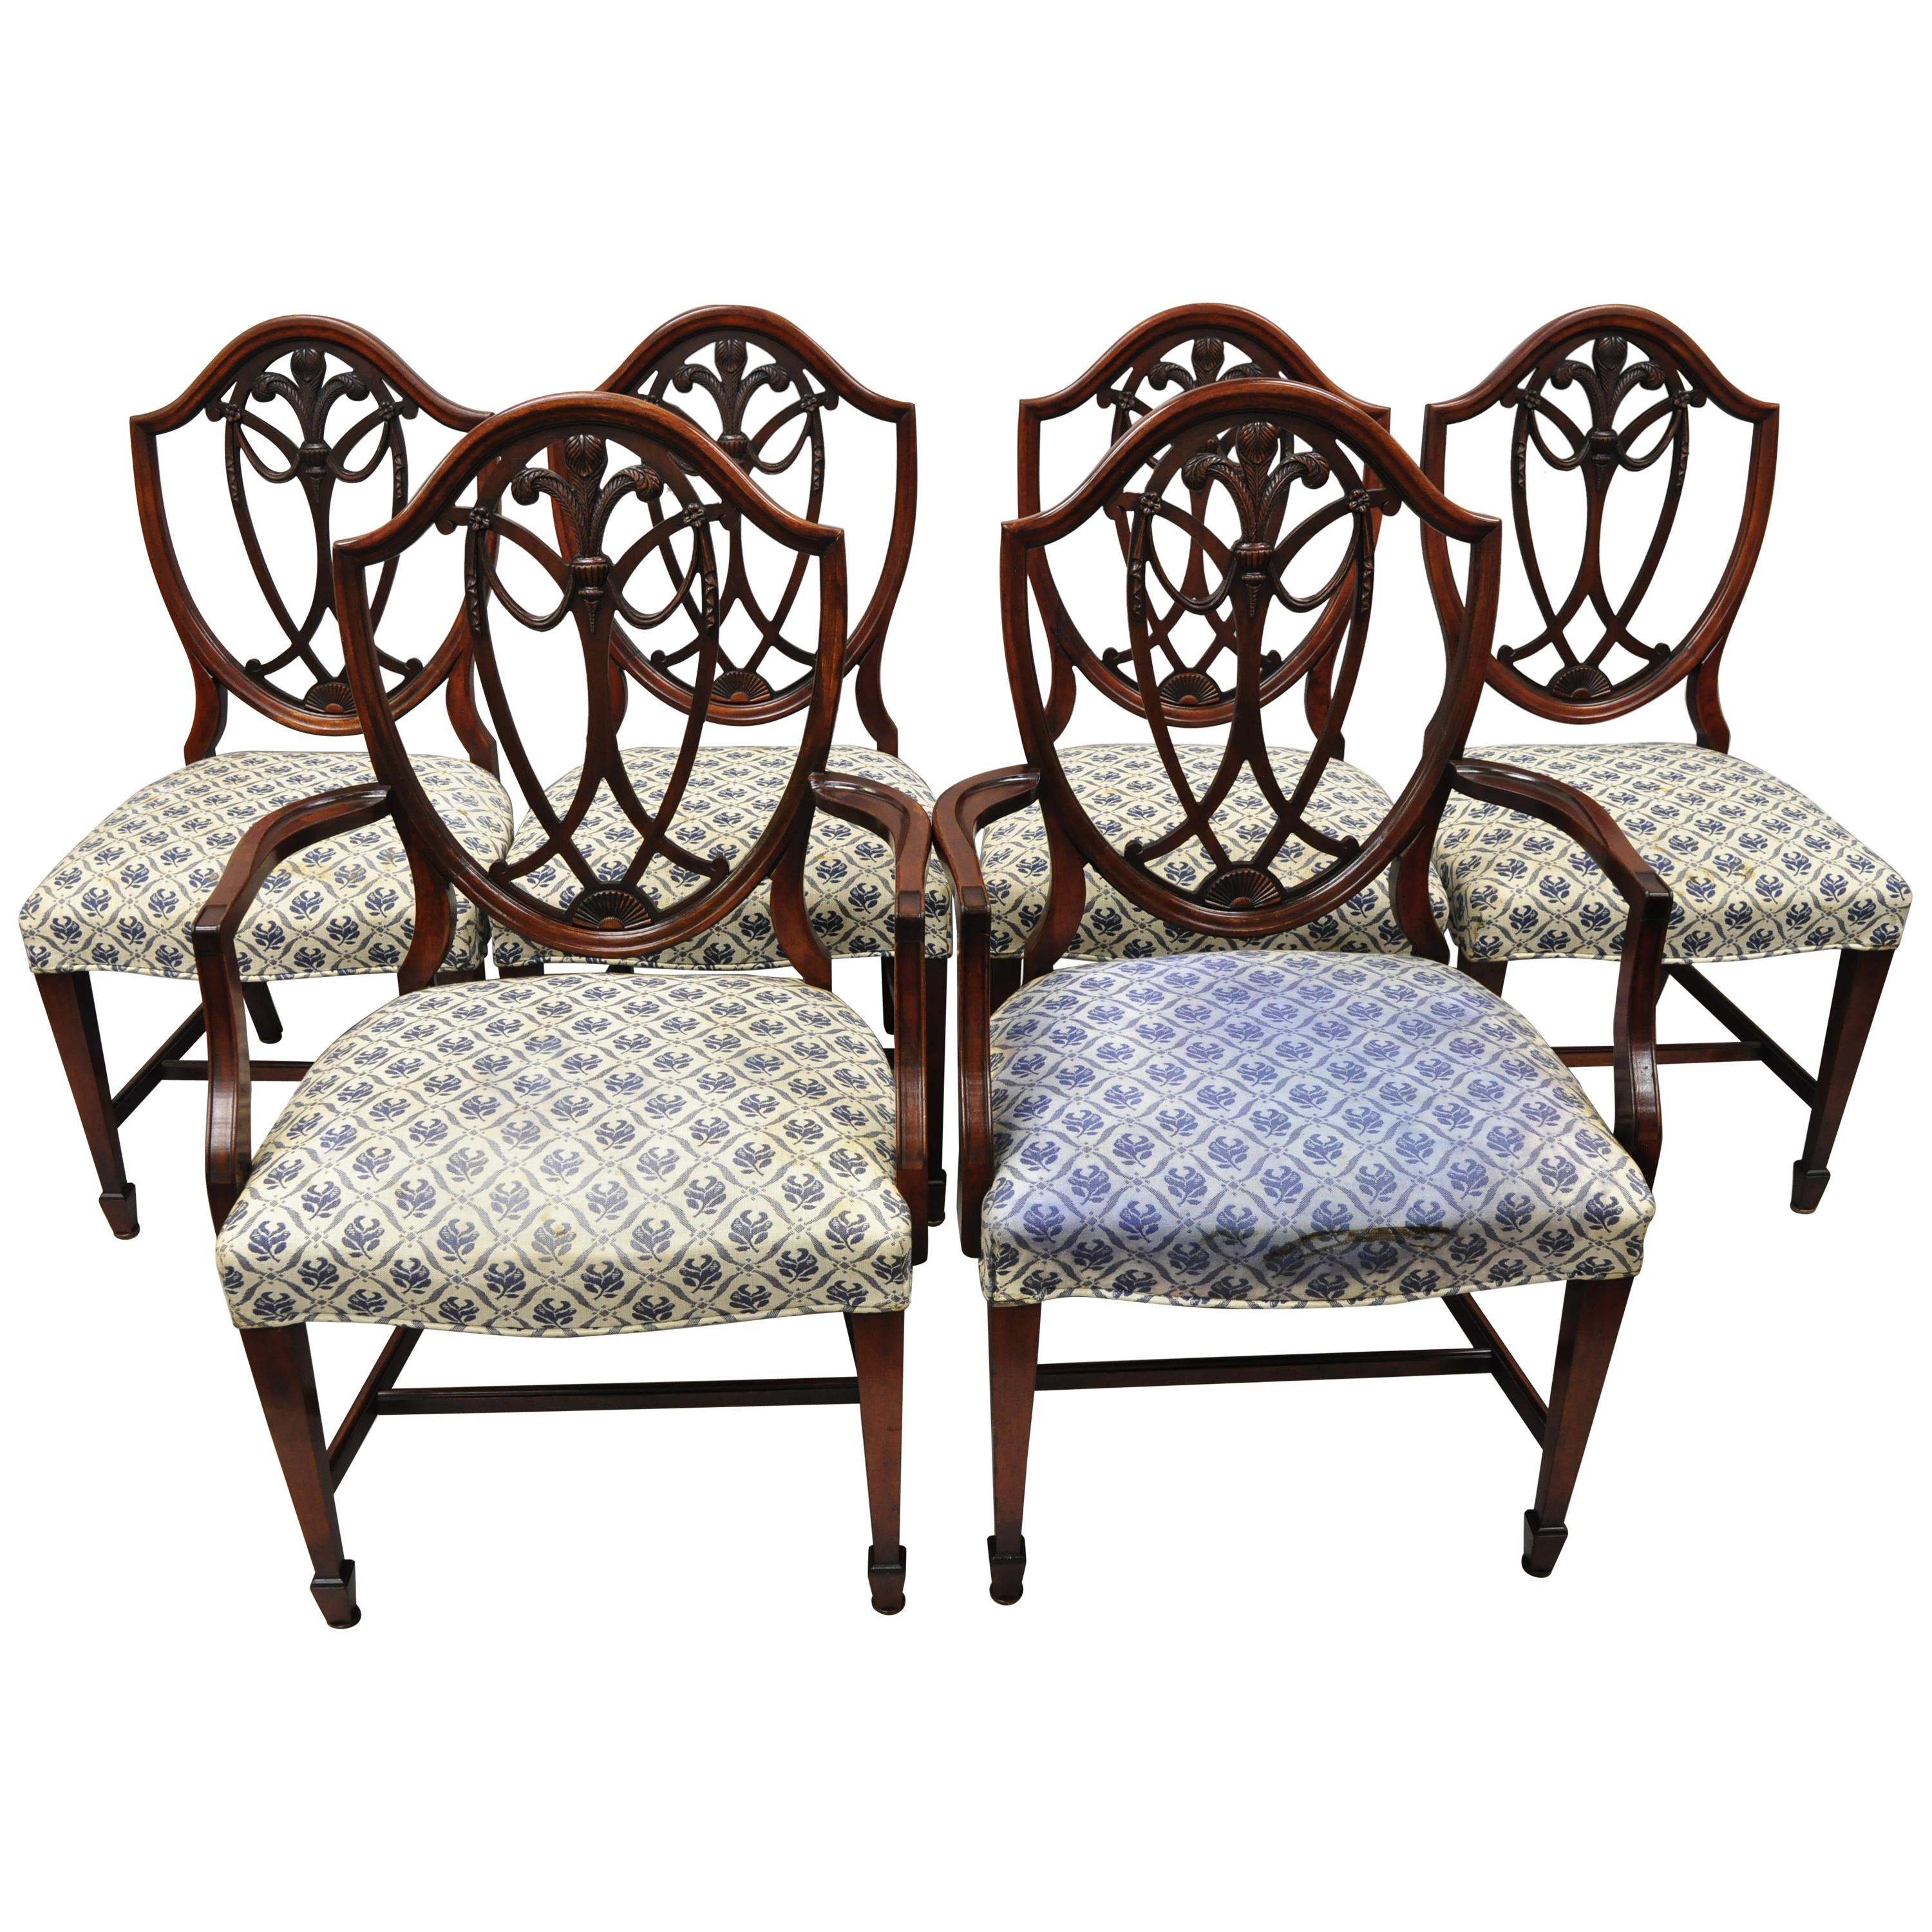 Hepplewhite Mahogany Prince of Wales Plume Shield Back Dining Chairs, Set of 6